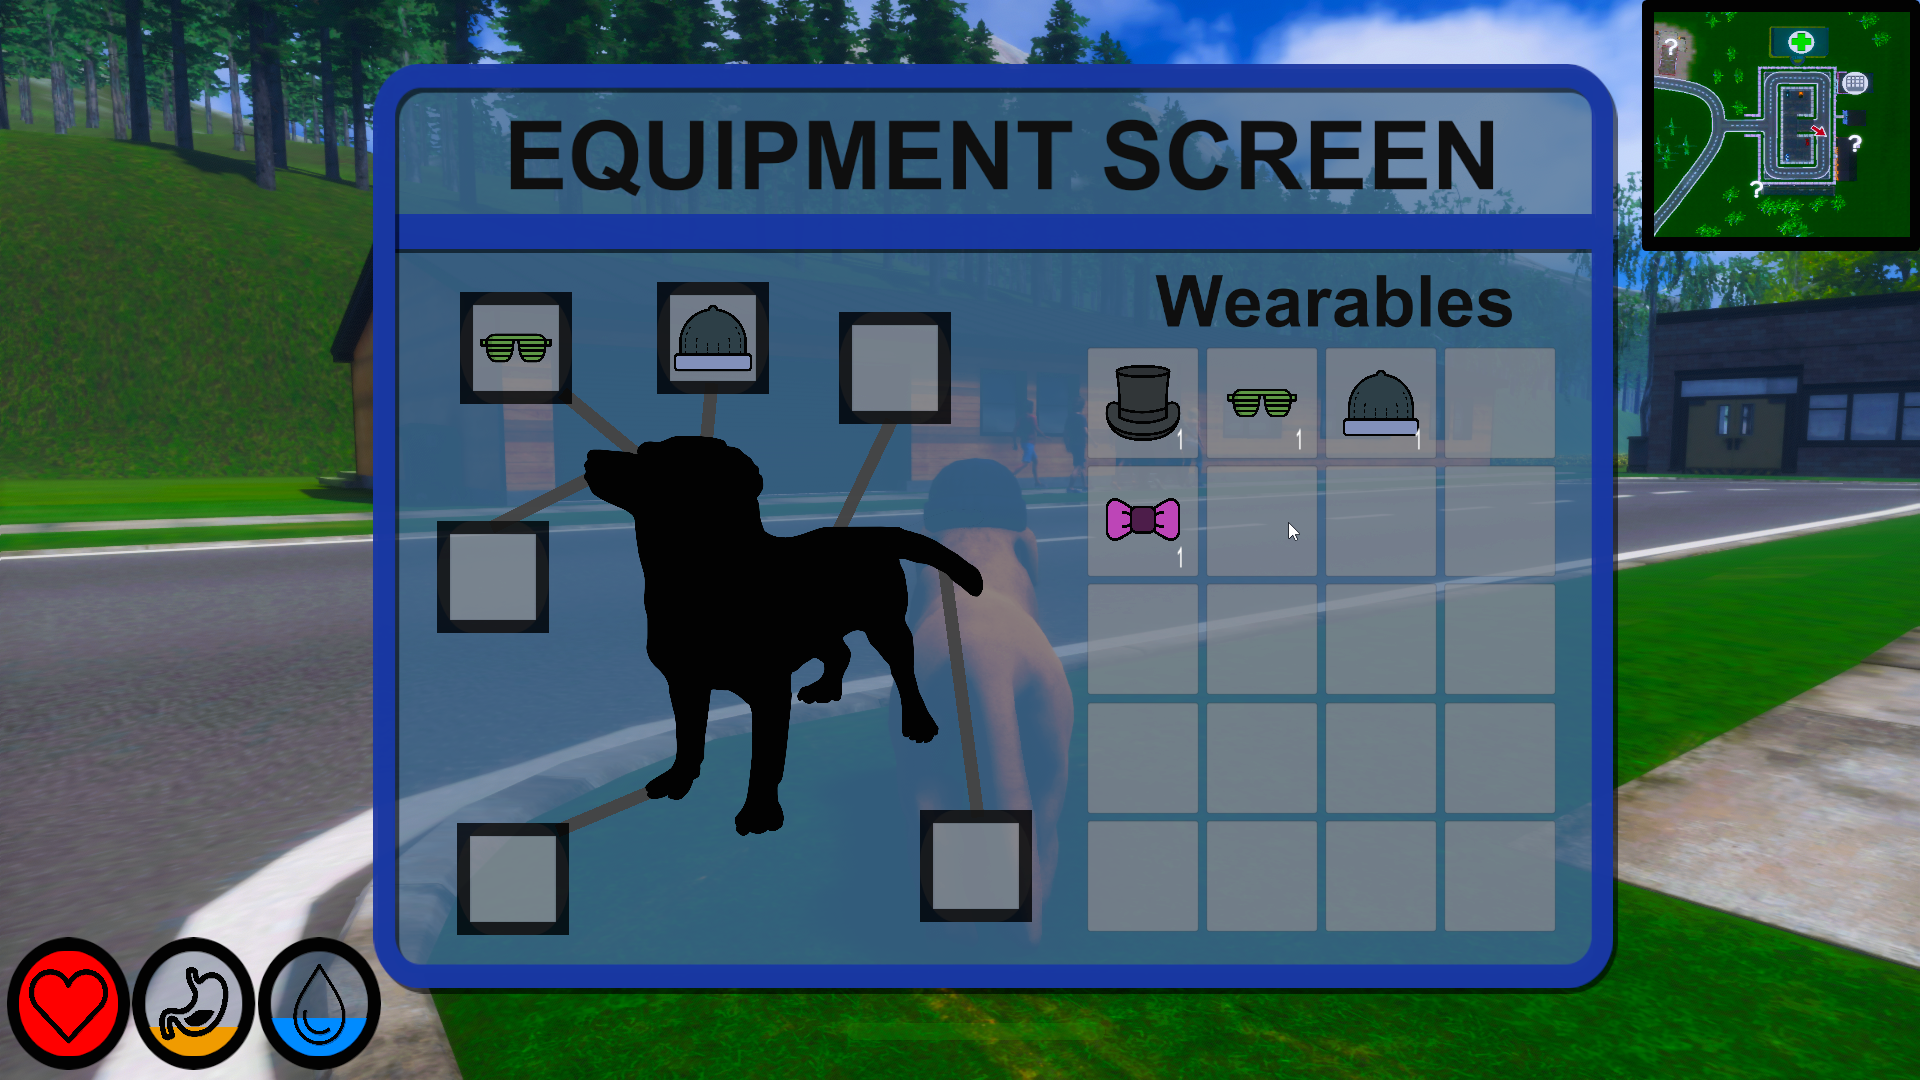 Lost Paws Equipment Screen